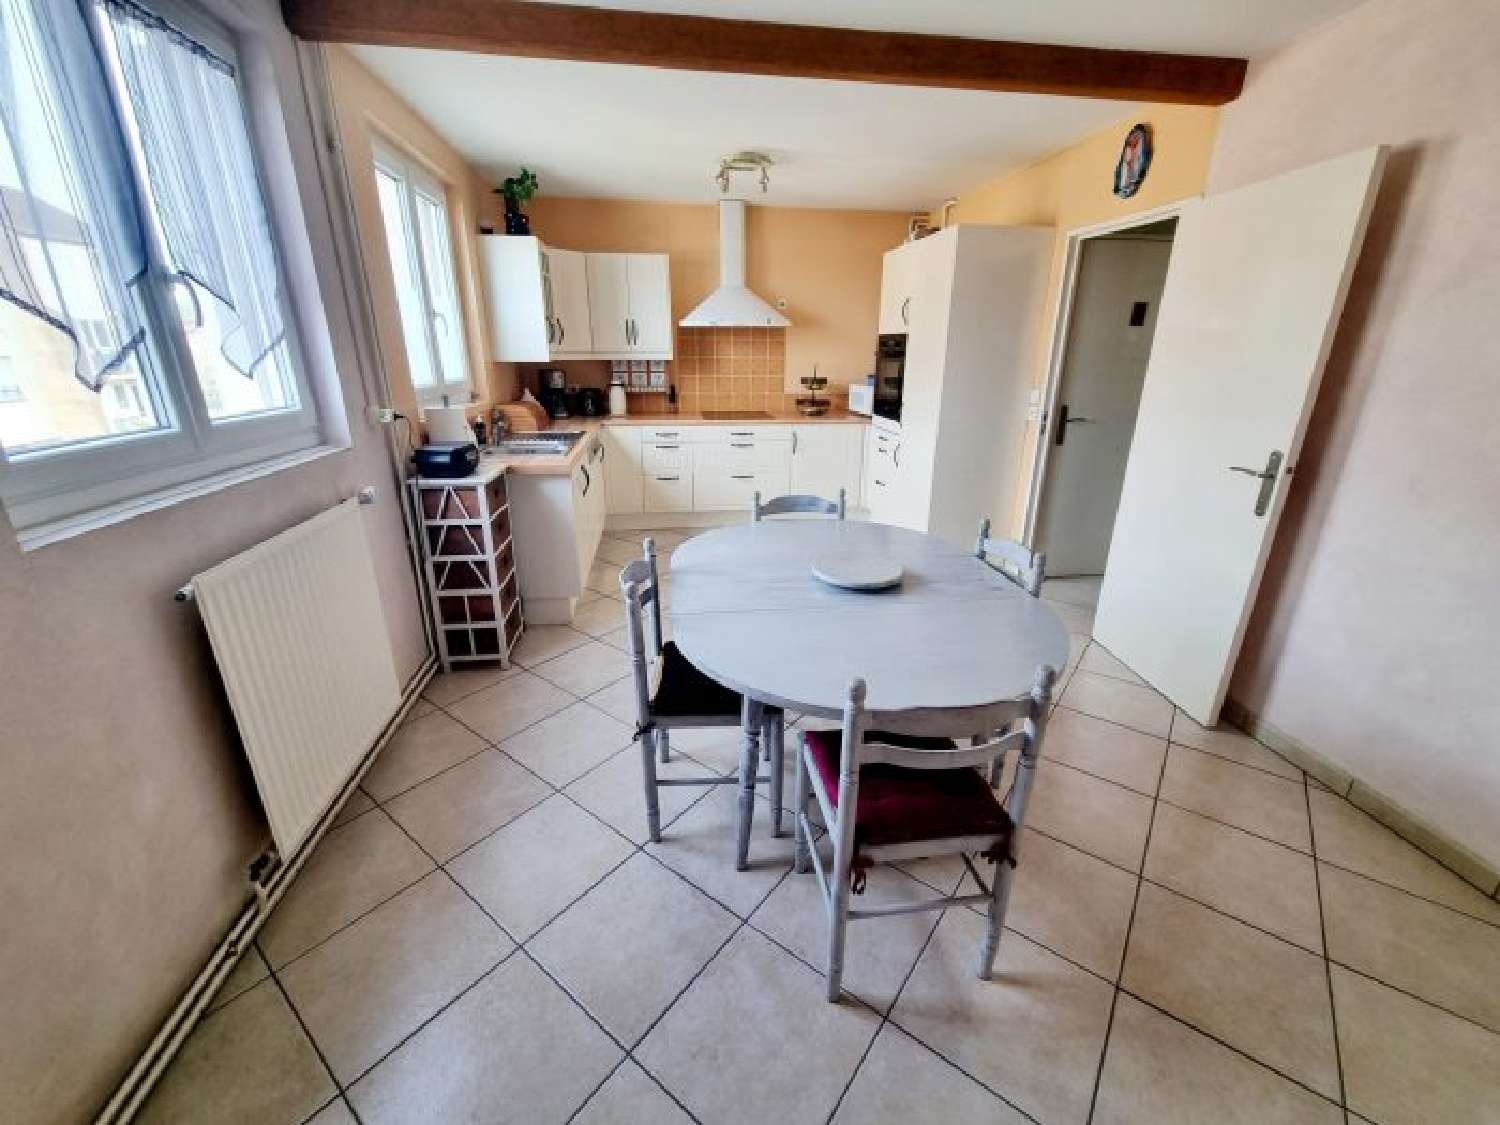  for sale apartment Metz Moselle 3